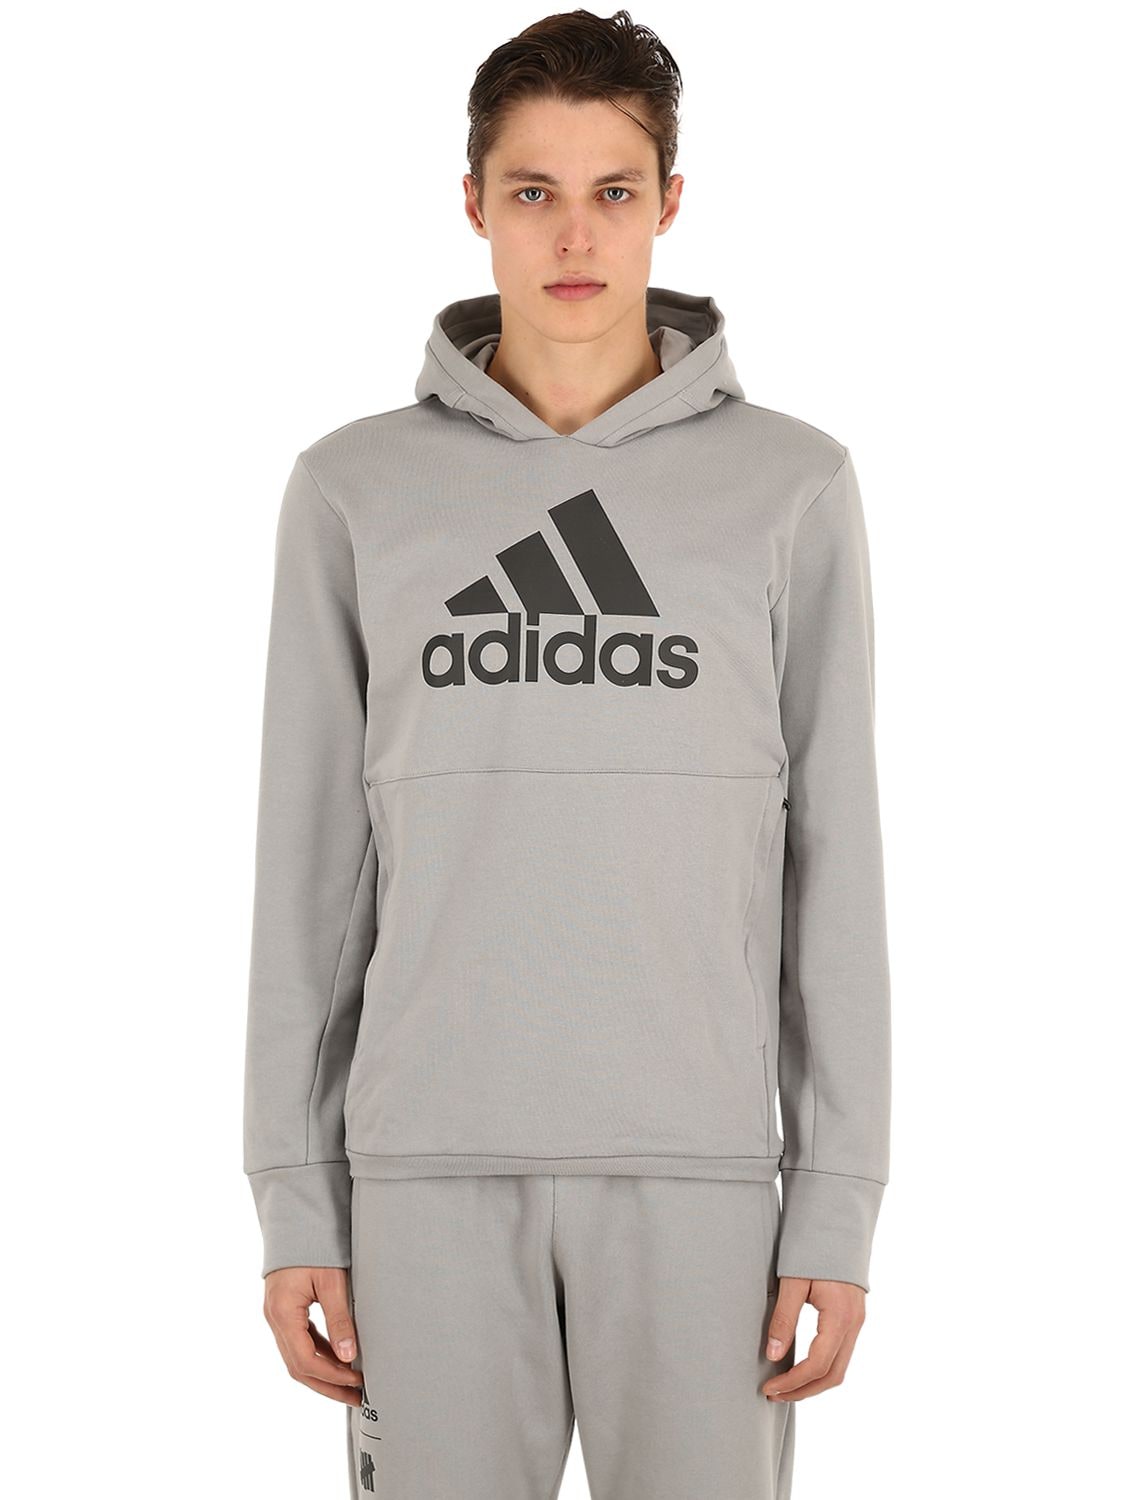 Adidas X Undefeated Undefeated Tech Sweatshirt Hoodie In Light Grey